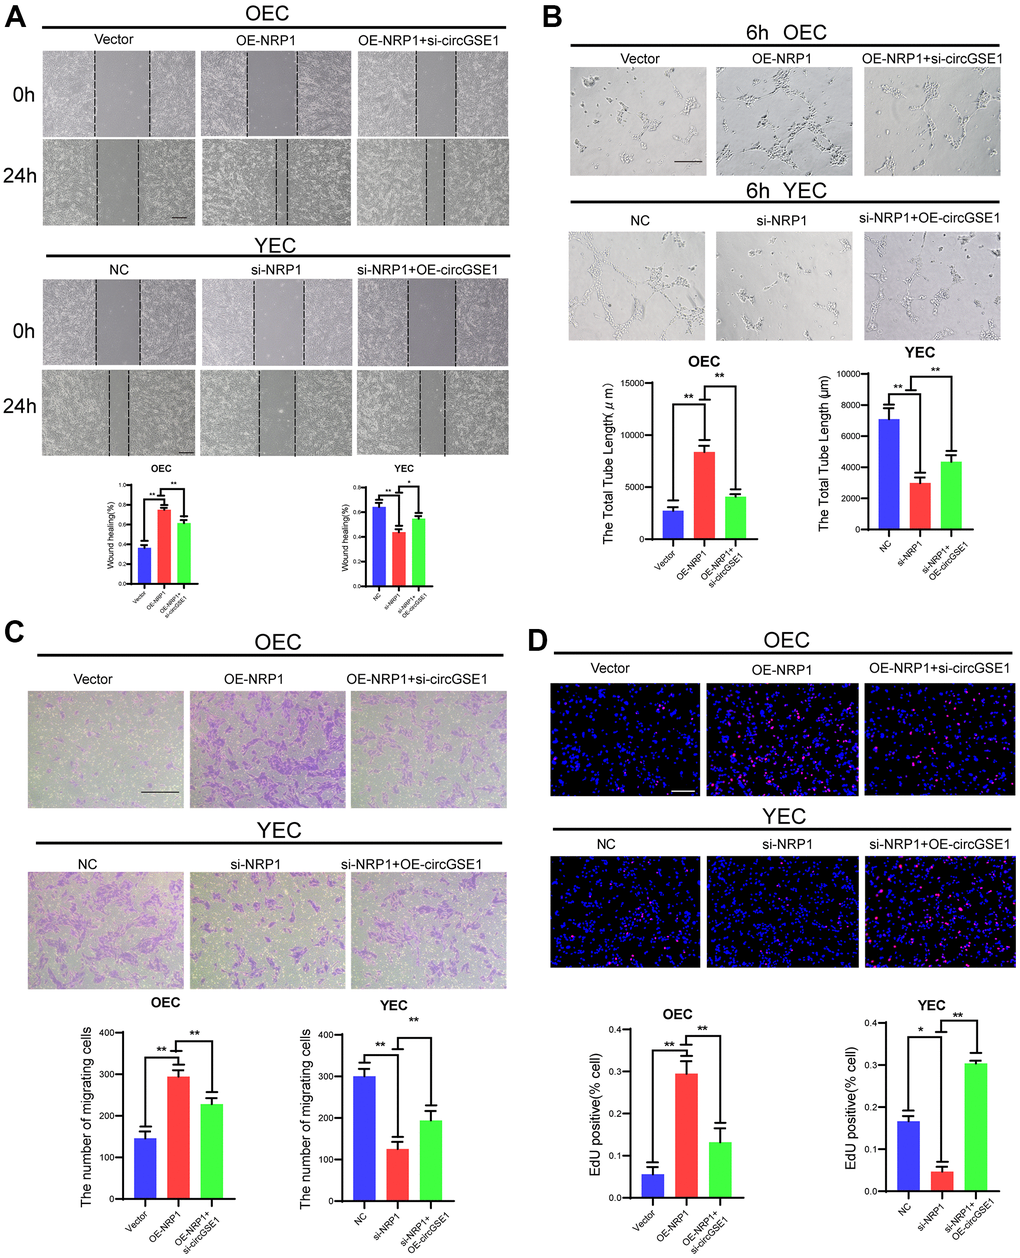 CircGSE1 regulates the angiogenic ability of MAECs via the NRP1. (A) Wound healing assay of OECs treated with vector, the OE-NRP1 or the OE-NRP1 + circGSE1 siRNA and YECs treated with the NC, NRP1-siRNA or NRP1-siRNA +OE-circGSE1. The graph indicates the quantification of the wounded area 24 hours after scratching (n=3, scale bar: 200 μm). (B) Tube formation assay of OECs treated with the vector, the OE-NRP1 or the OE-NRP1 + circGSE1 siRNA and YECs treated with the NC, NRP1-siRNA or NRP1-siRNA +OE-circGSE1 (n=3, scale bar, 200 μm). (C) Migration assay of OECs treated with the vector, the OE-NRP1 or the OE-NRP1 + circGSE1 siRNA and YECs treated with the NC, NRP1-siRNA or NRP1-siRNA +OE-circGSE1 (n=5, scale bar, 200 μm). (D) EdU assay of OECs treated with the vector, the OE-NRP1 or the OE-NRP1 + circGSE1 siRNA and YECs treated with the NC, NRP1-siRNA or NRP1-siRNA +OE-circGSE1 (n=5, scale bar, 200 μm). (The data are expressed as the mean ± SD, *P 